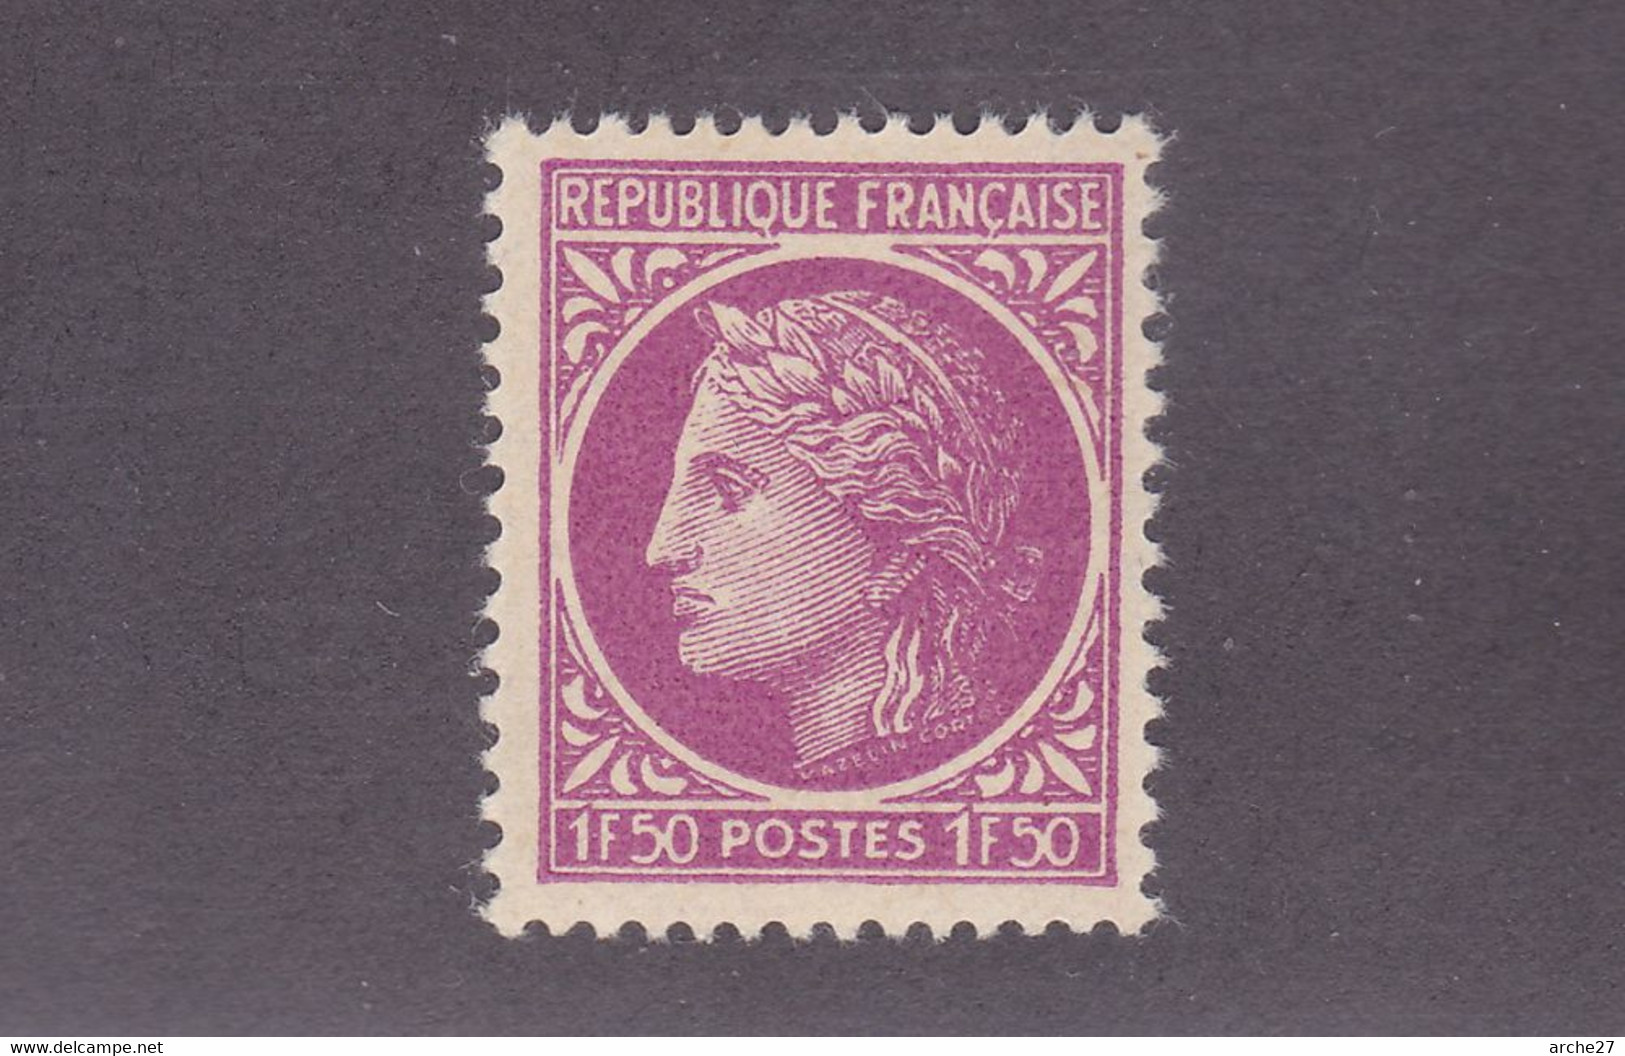 TIMBRE FRANCE N° 679 NEUF ** - Unused Stamps